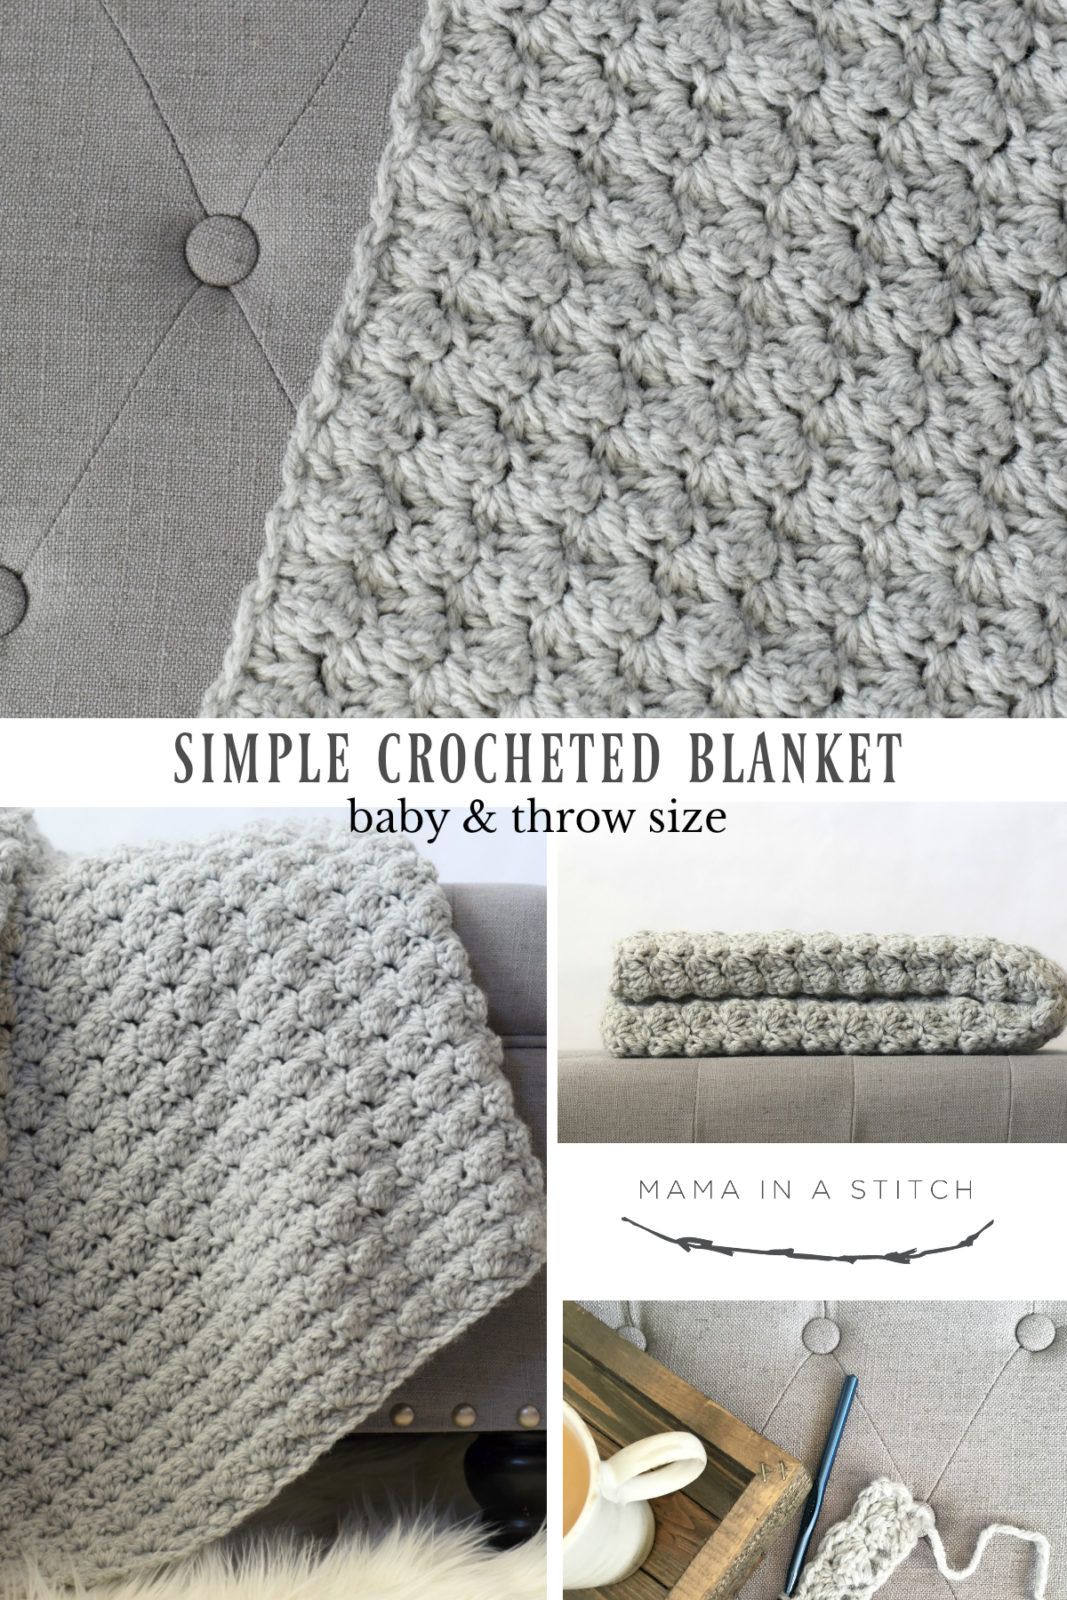 Super Easy Knit Baby Blanket Pattern Simple Crocheted Blanket Go To Pattern Mama In A Stitch